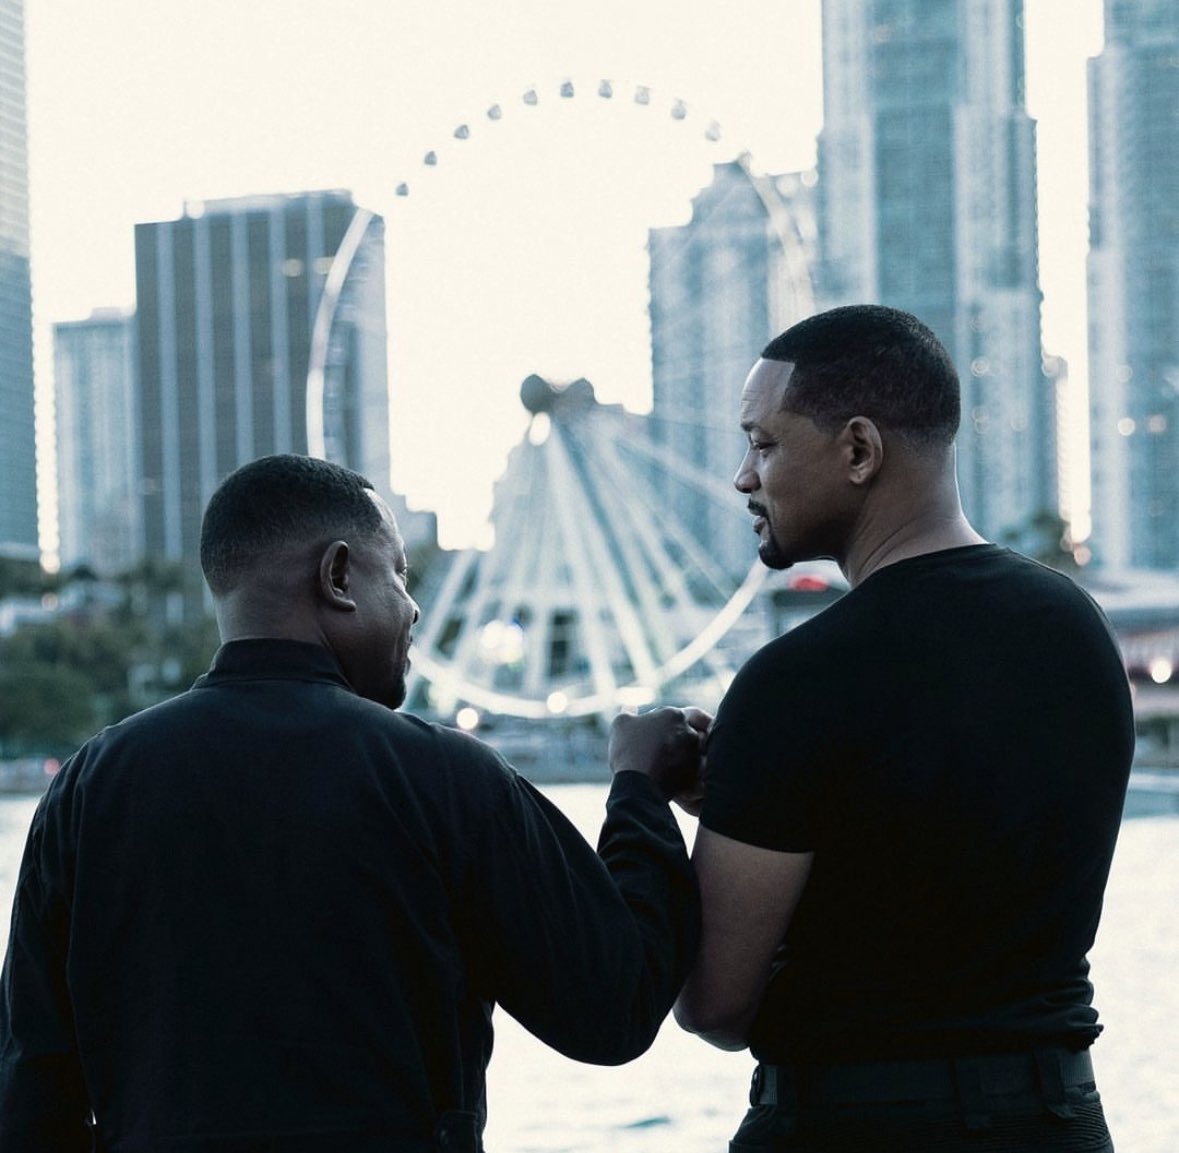 ‘BAD BOYS 4’ has wrapped filming. In theaters on June 7.